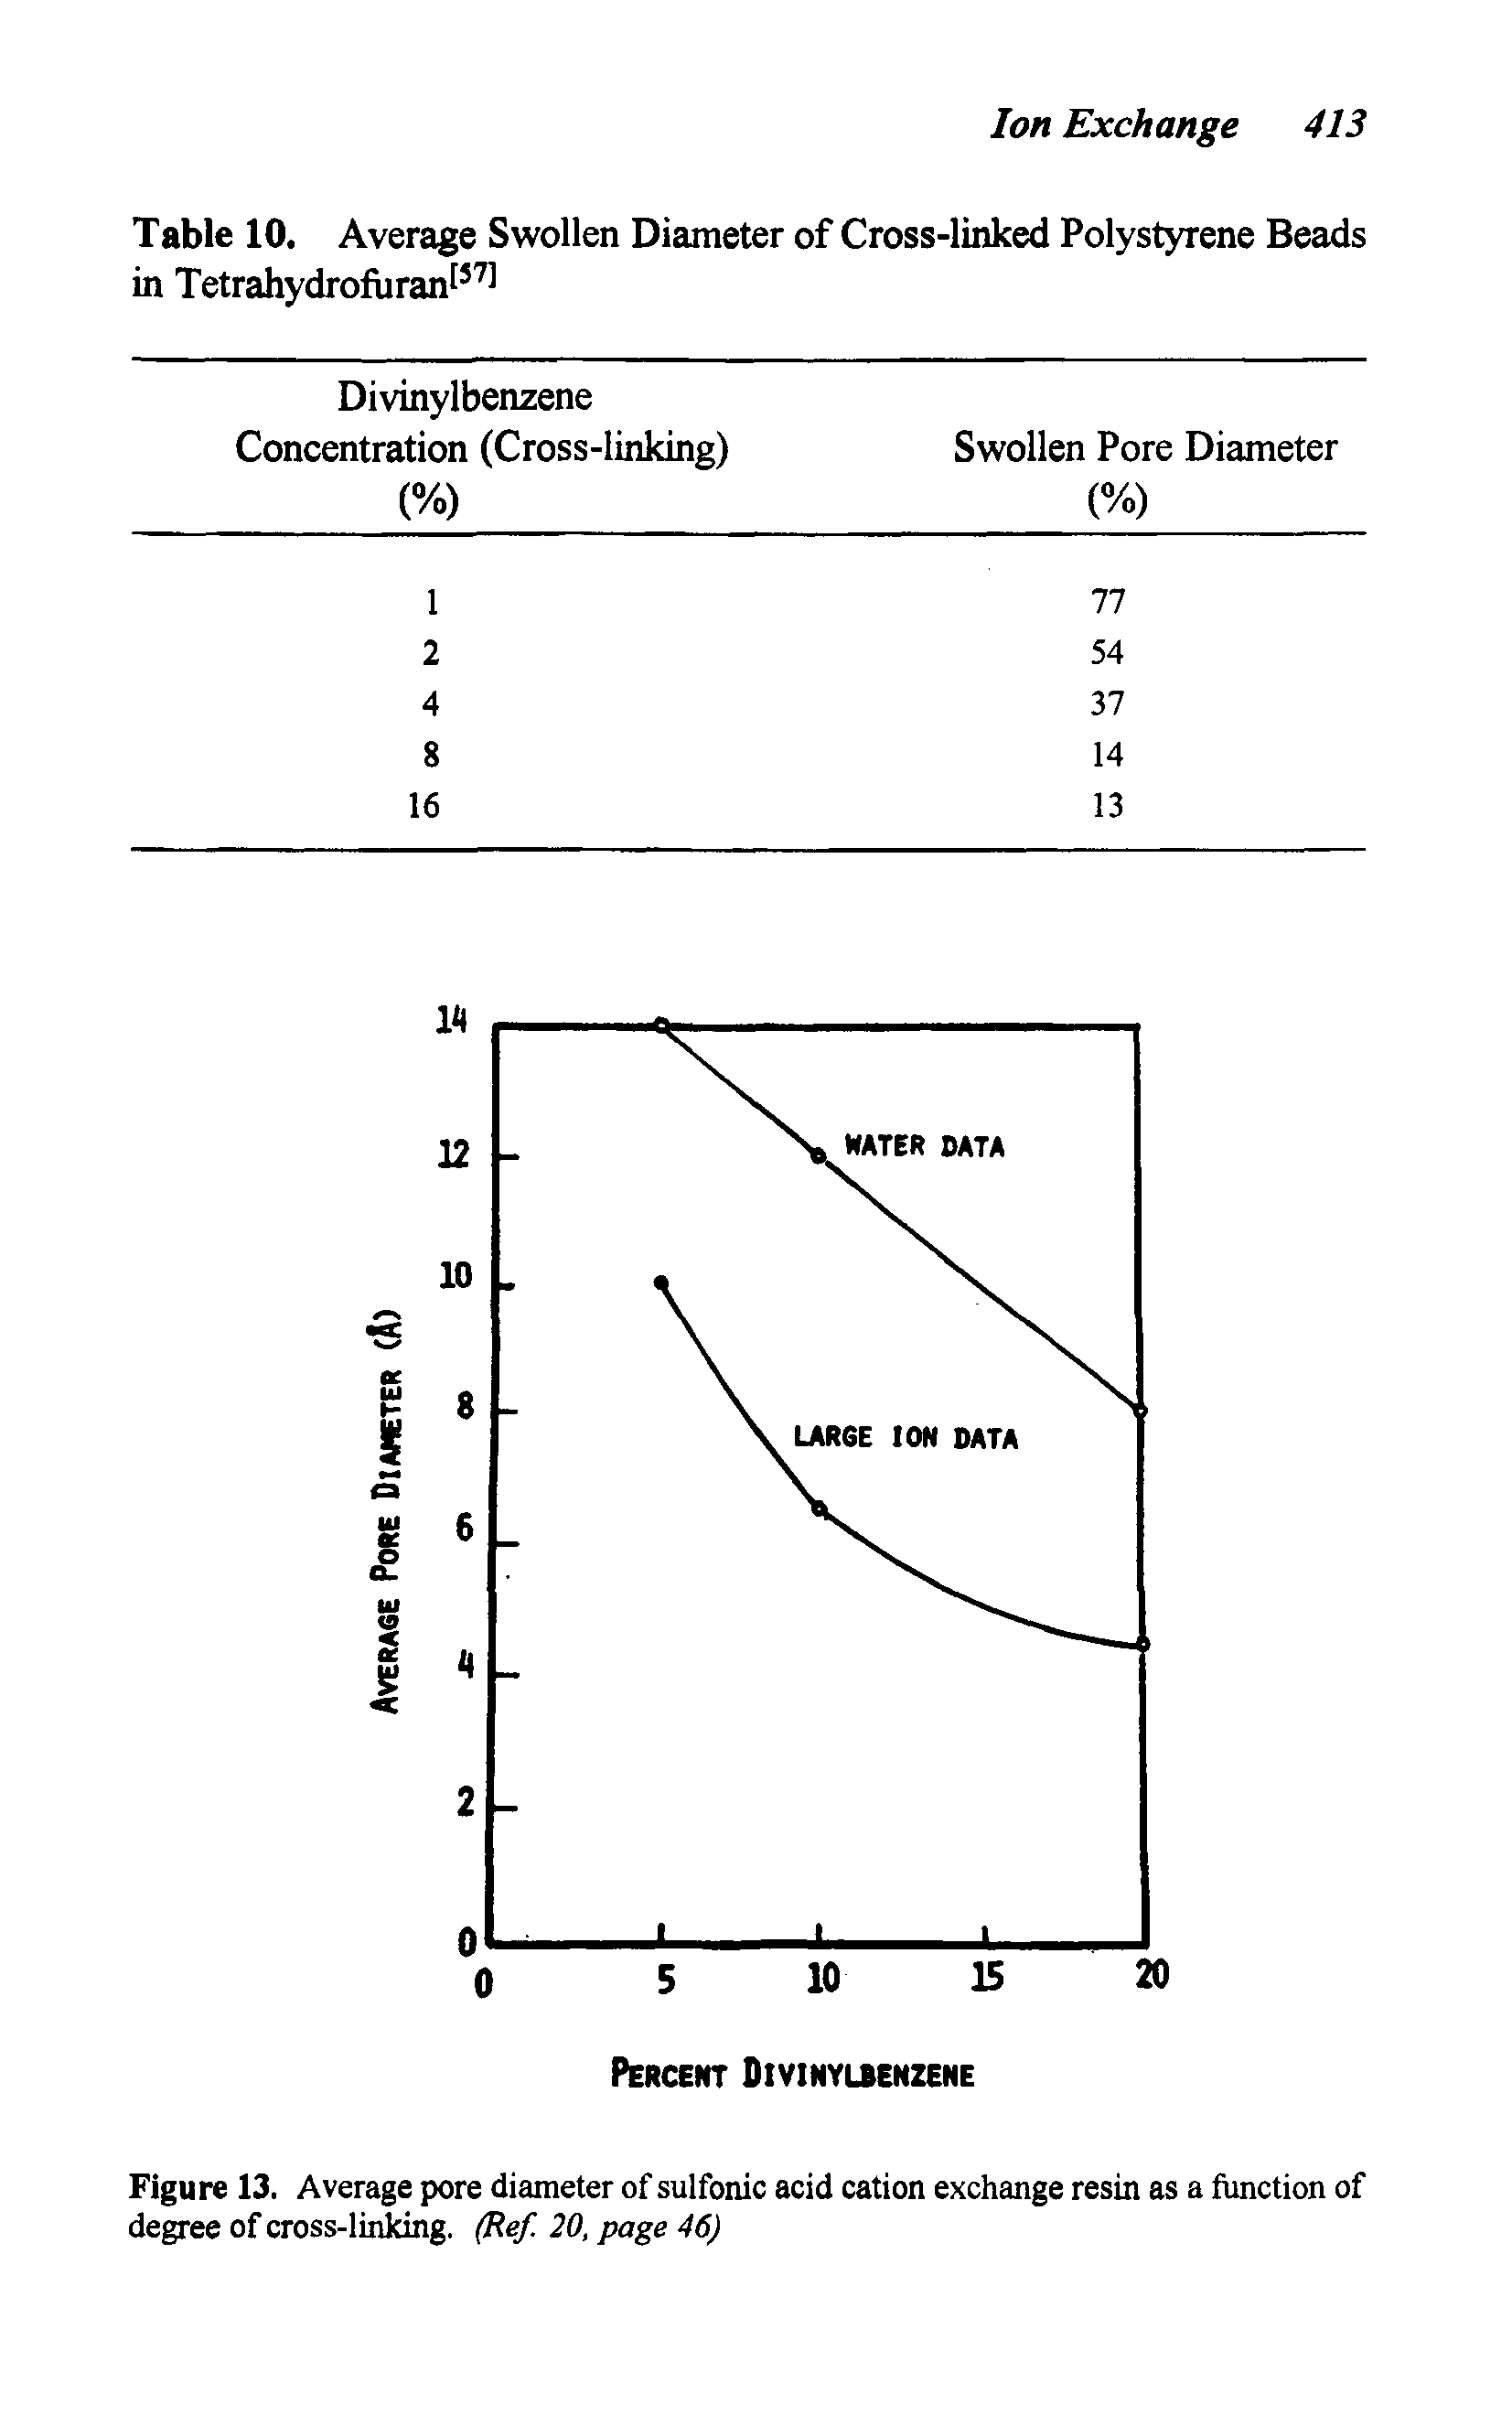 Figure 13. Average pore diameter of sulfonic acid cation exchange resin as a function of degree of cross-linking. (Ref. 20, page 46)...